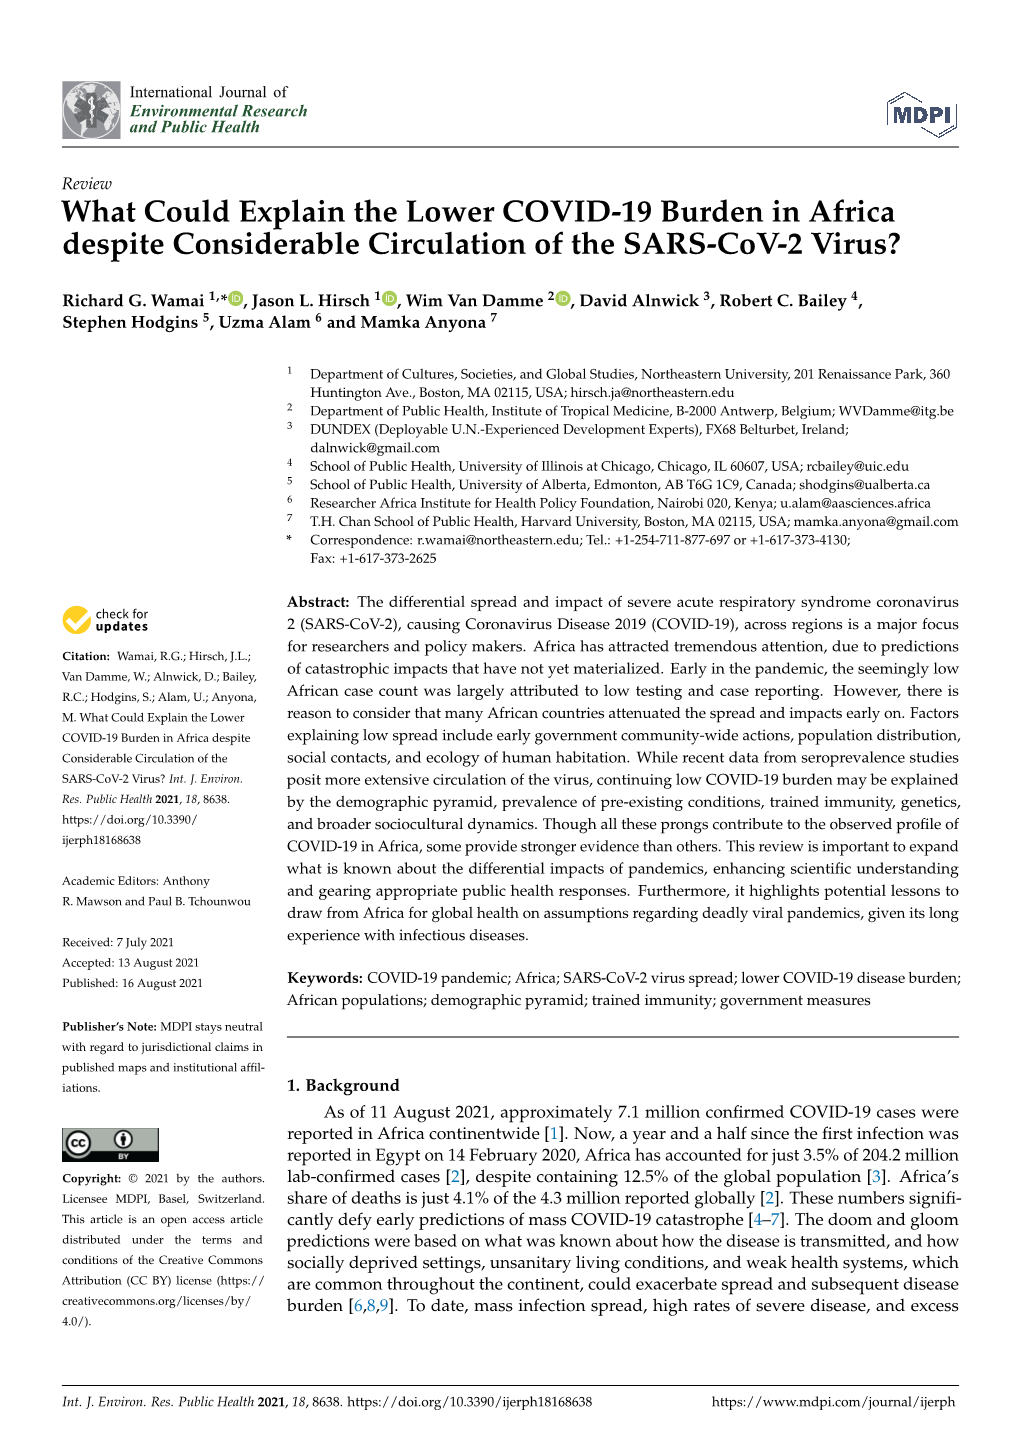 What Could Explain the Lower COVID-19 Burden in Africa Despite Considerable Circulation of the SARS-Cov-2 Virus?